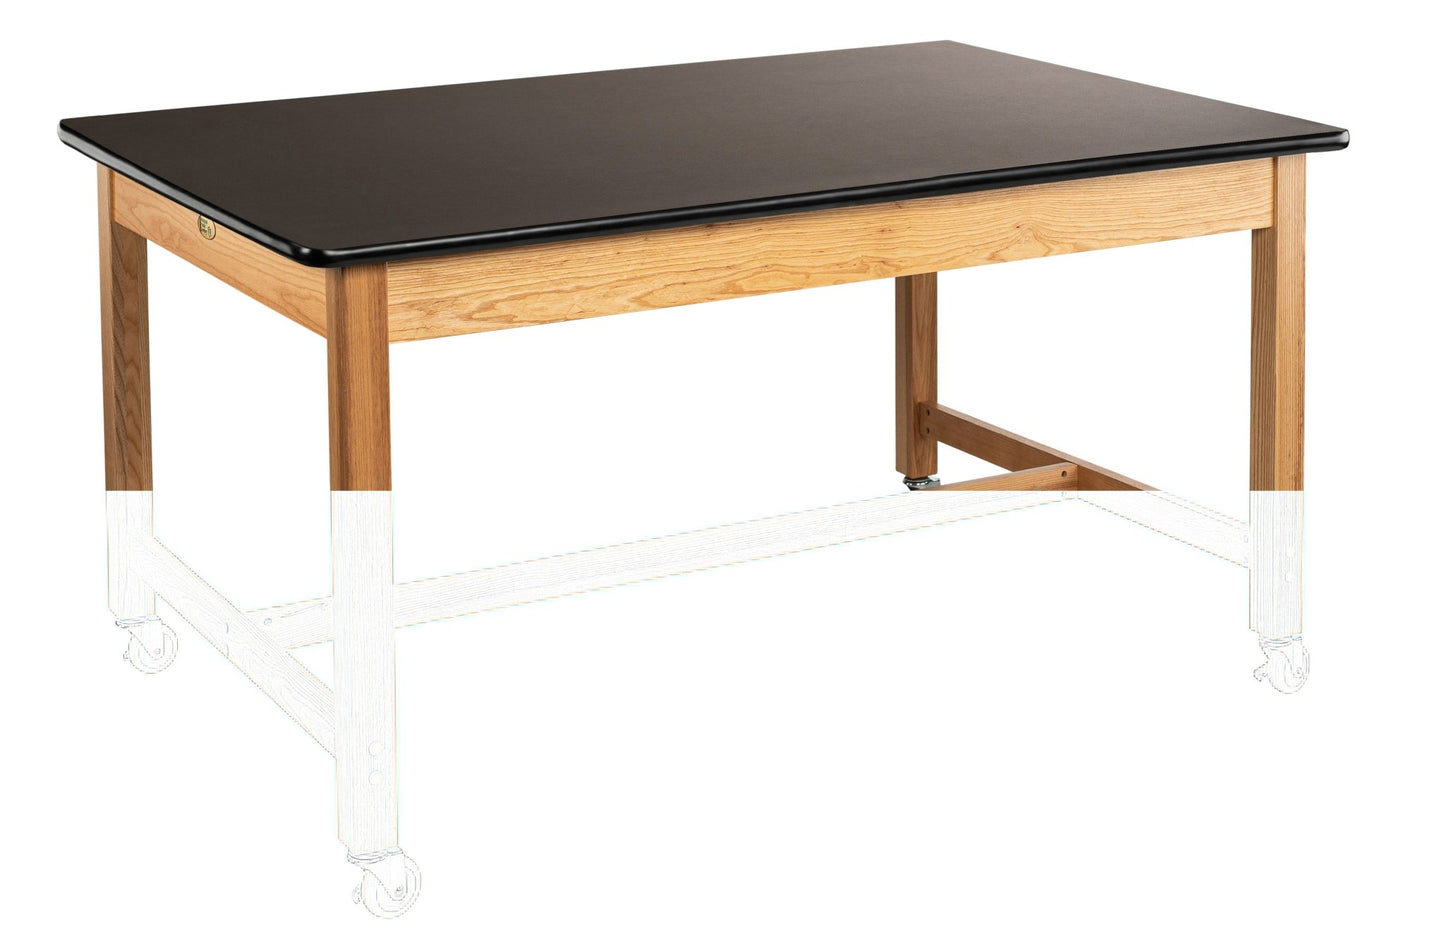 NPS Wood Science Lab Table, 42 x 60 x 30, HPL Top (National Public Seating NPS-SLT1-4260H) - SchoolOutlet